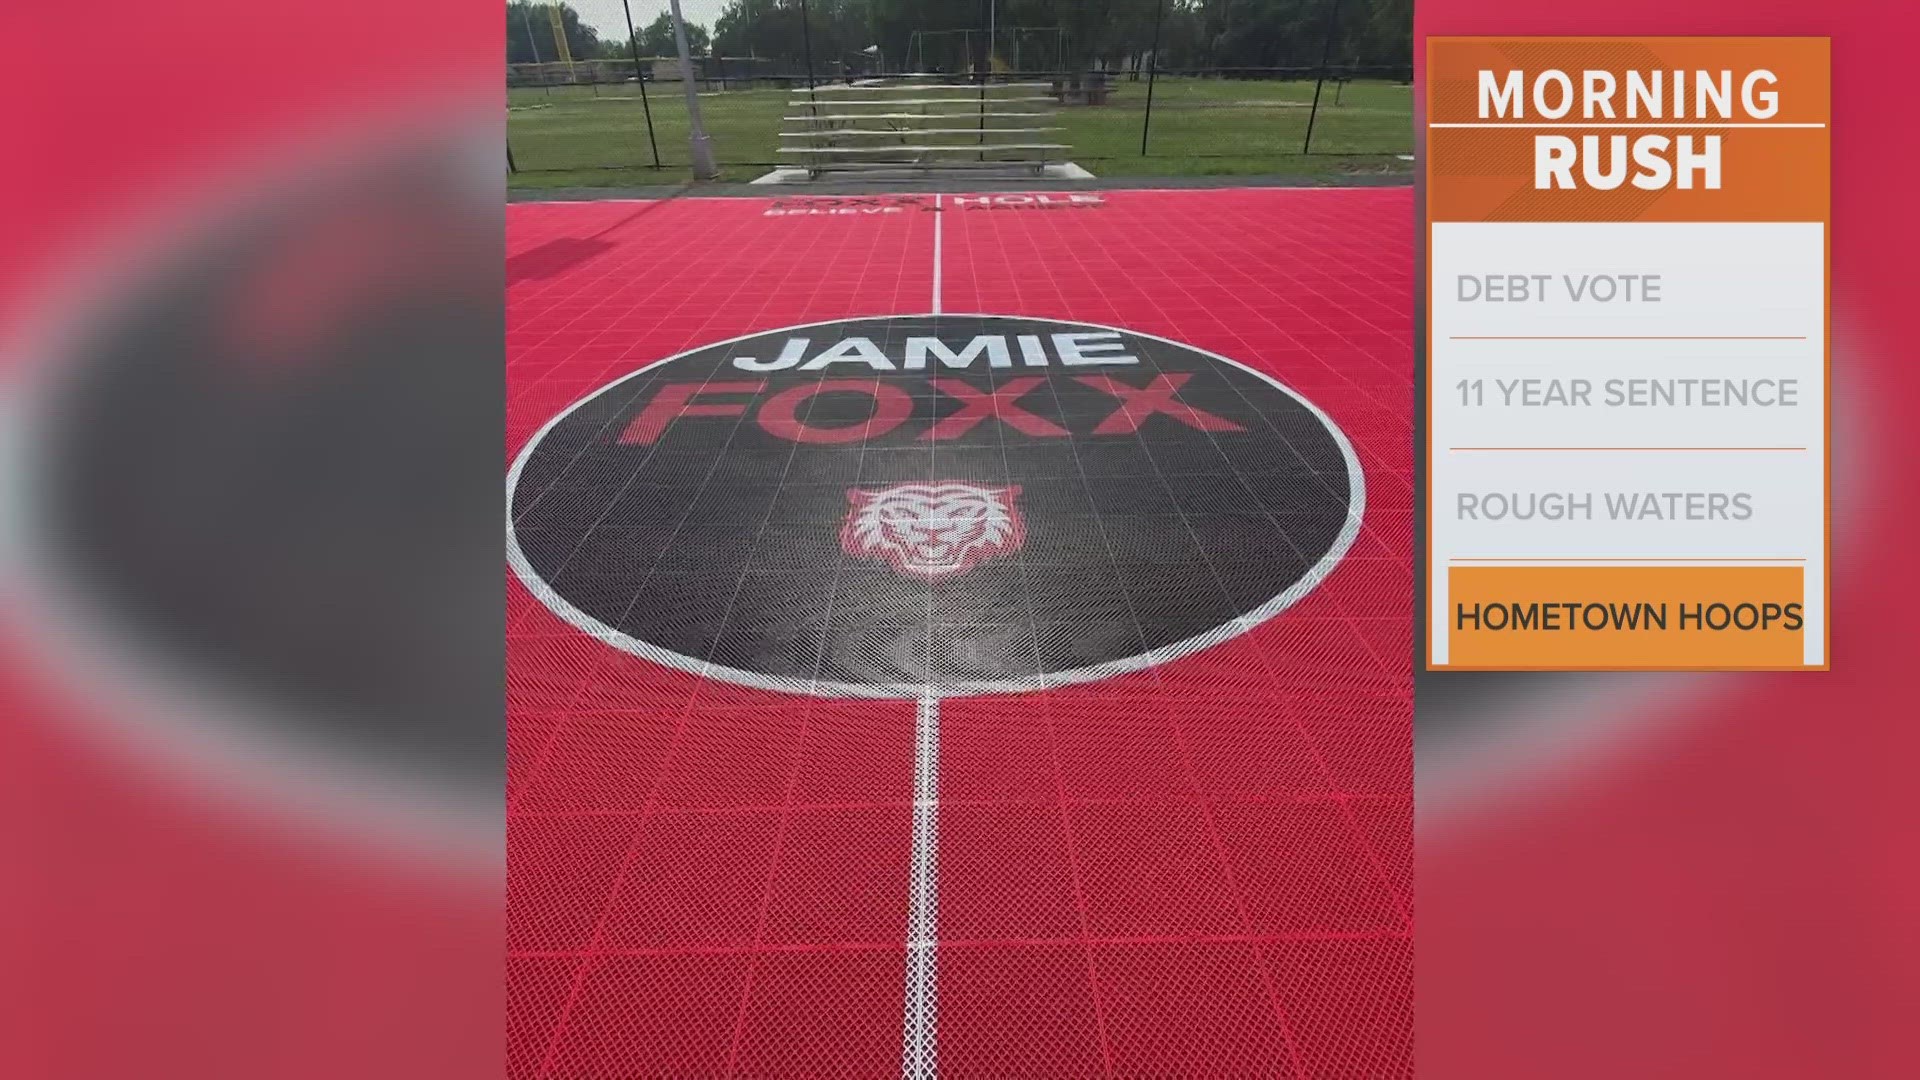 The red-colored court has Jamie Foxx written at center court and "Foxx Hole: Believe & Achieve" above that.